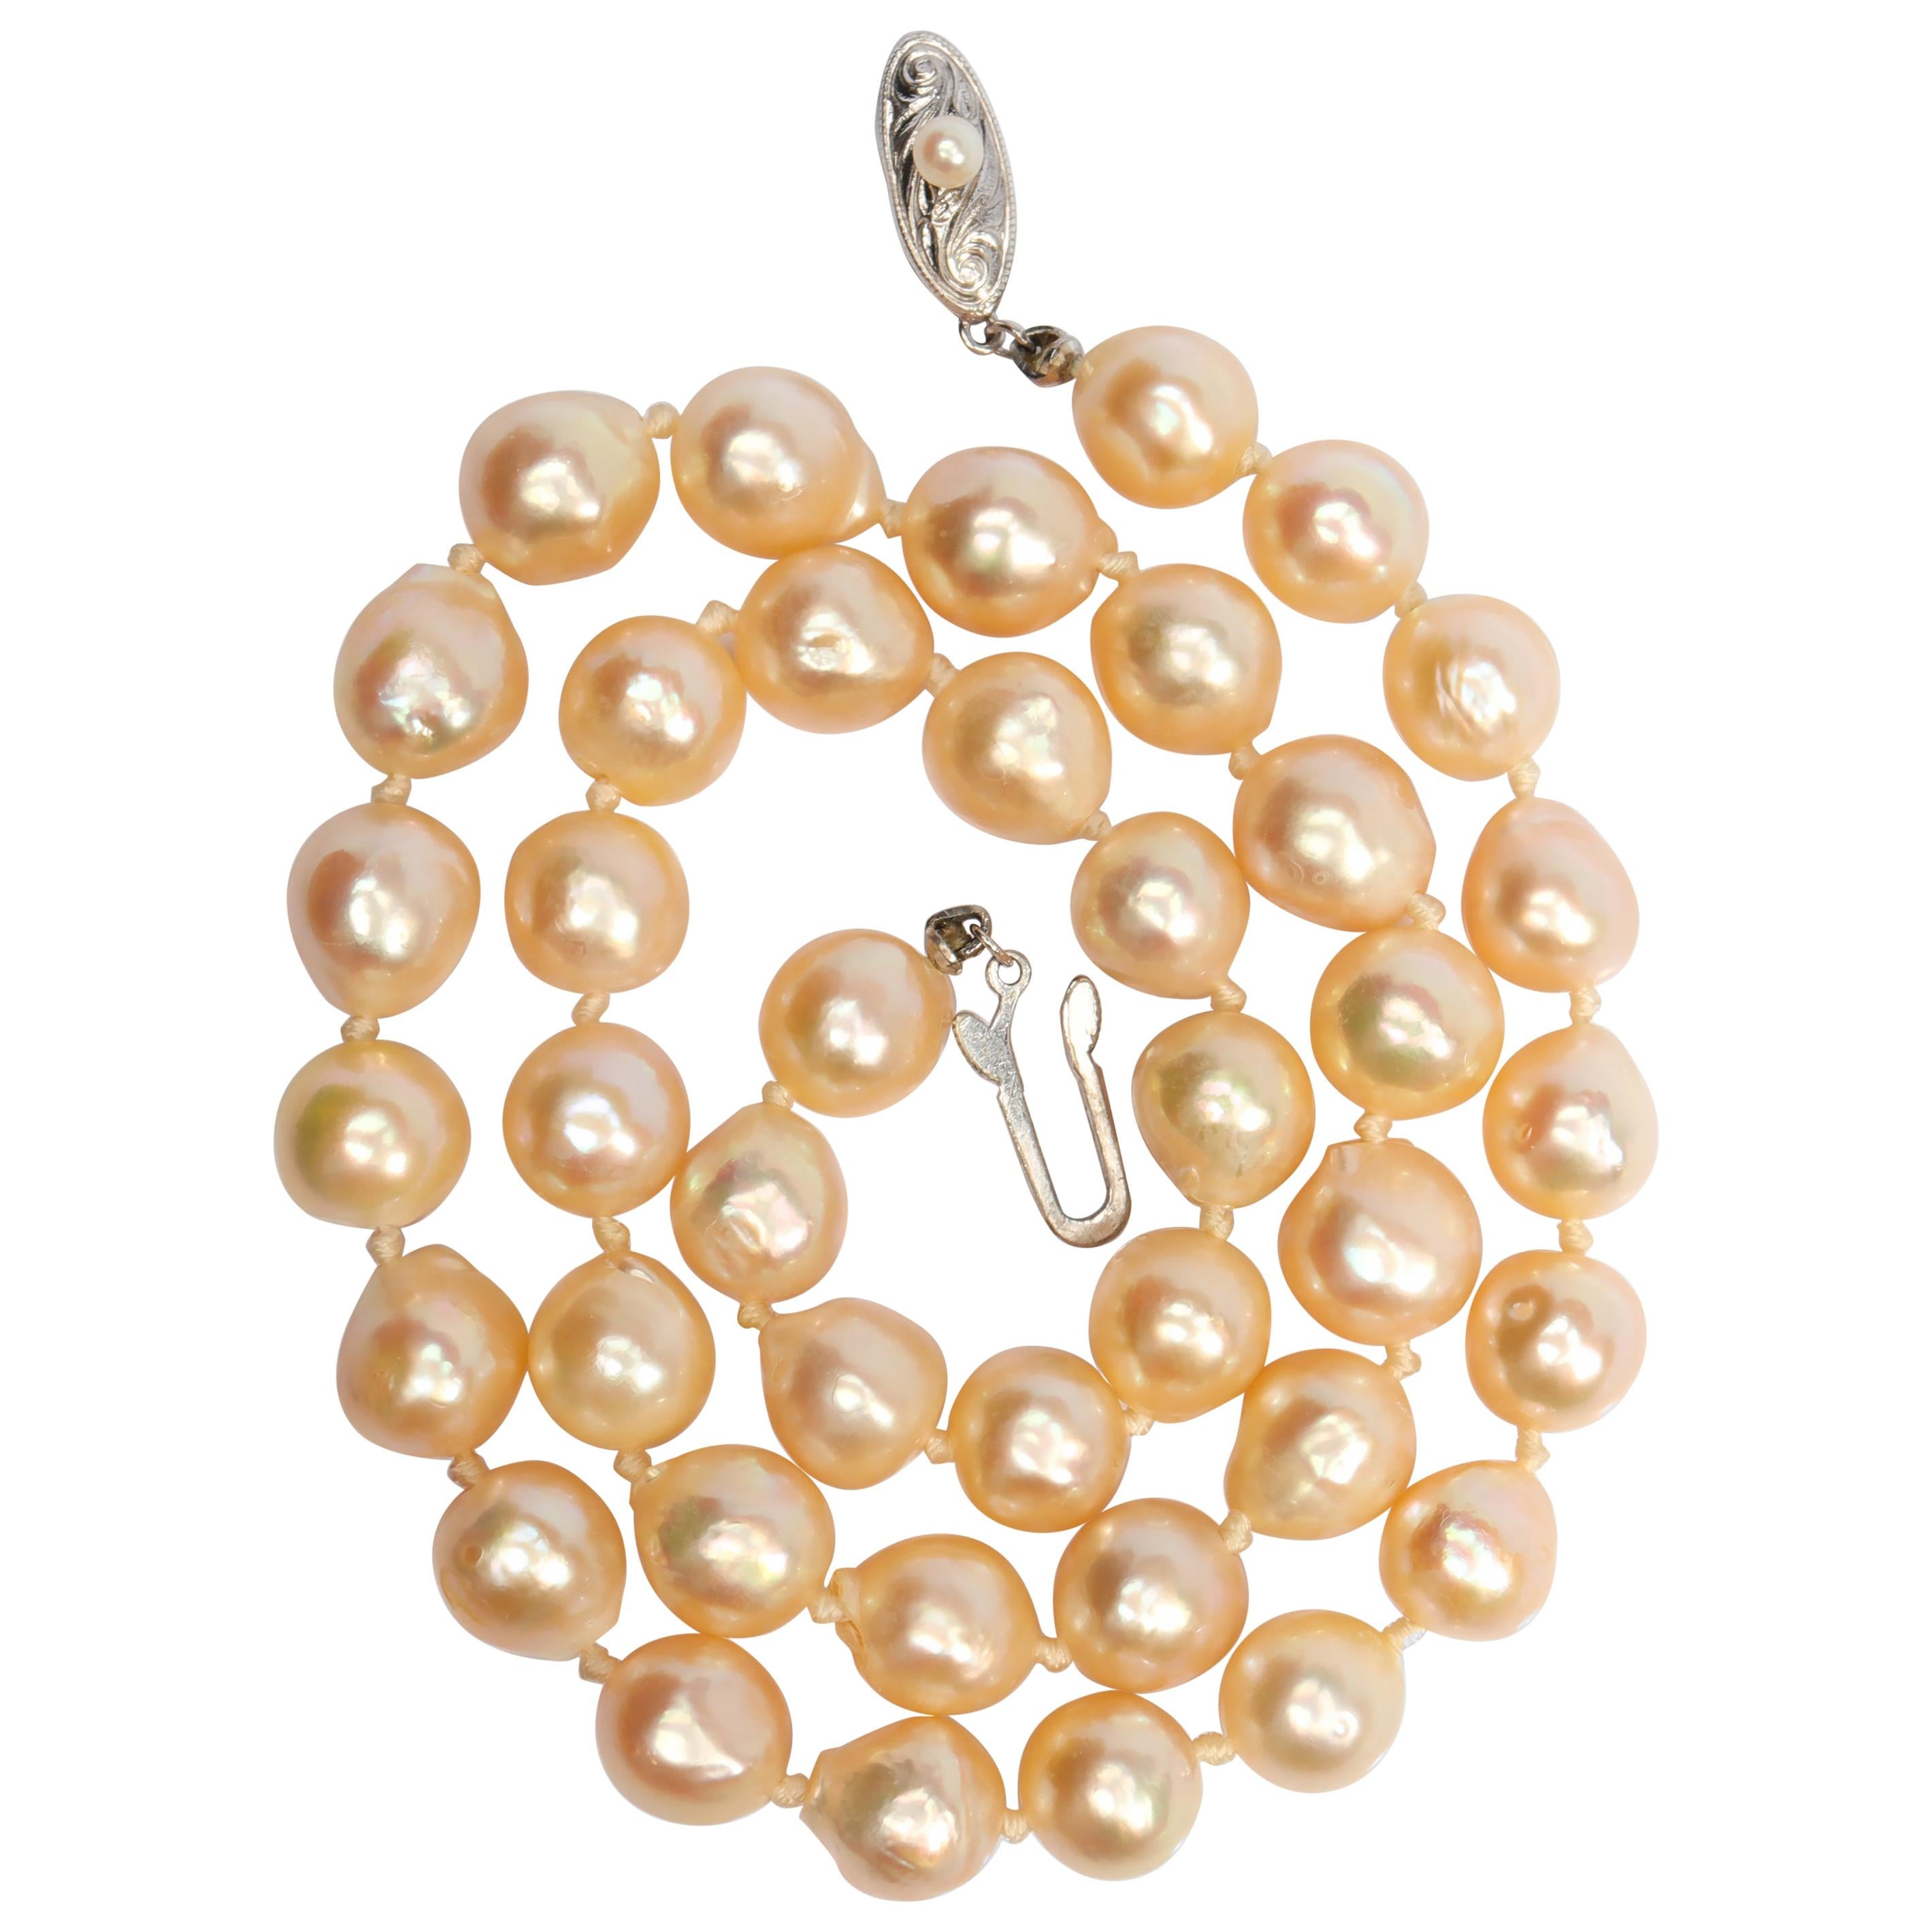 South Sea Pearl Necklace is Early Example of Cultured South Sea Pearls